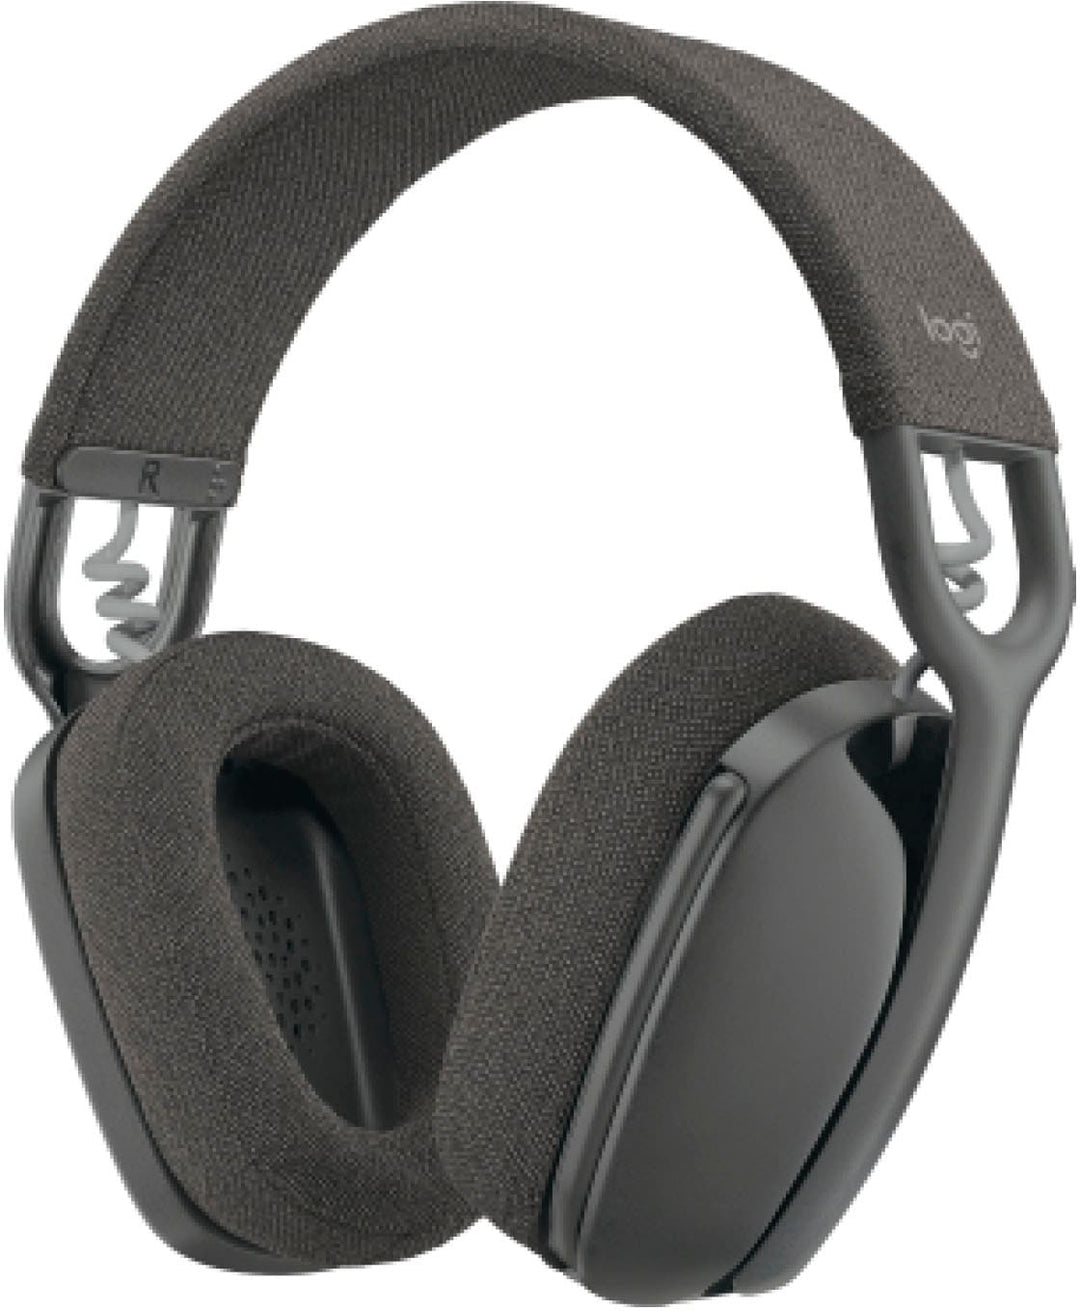 Logitech - Zone Vibe 100 Bluetooth Over Ear Headphones with Noise-Cancelling Microphone - Graphite_5